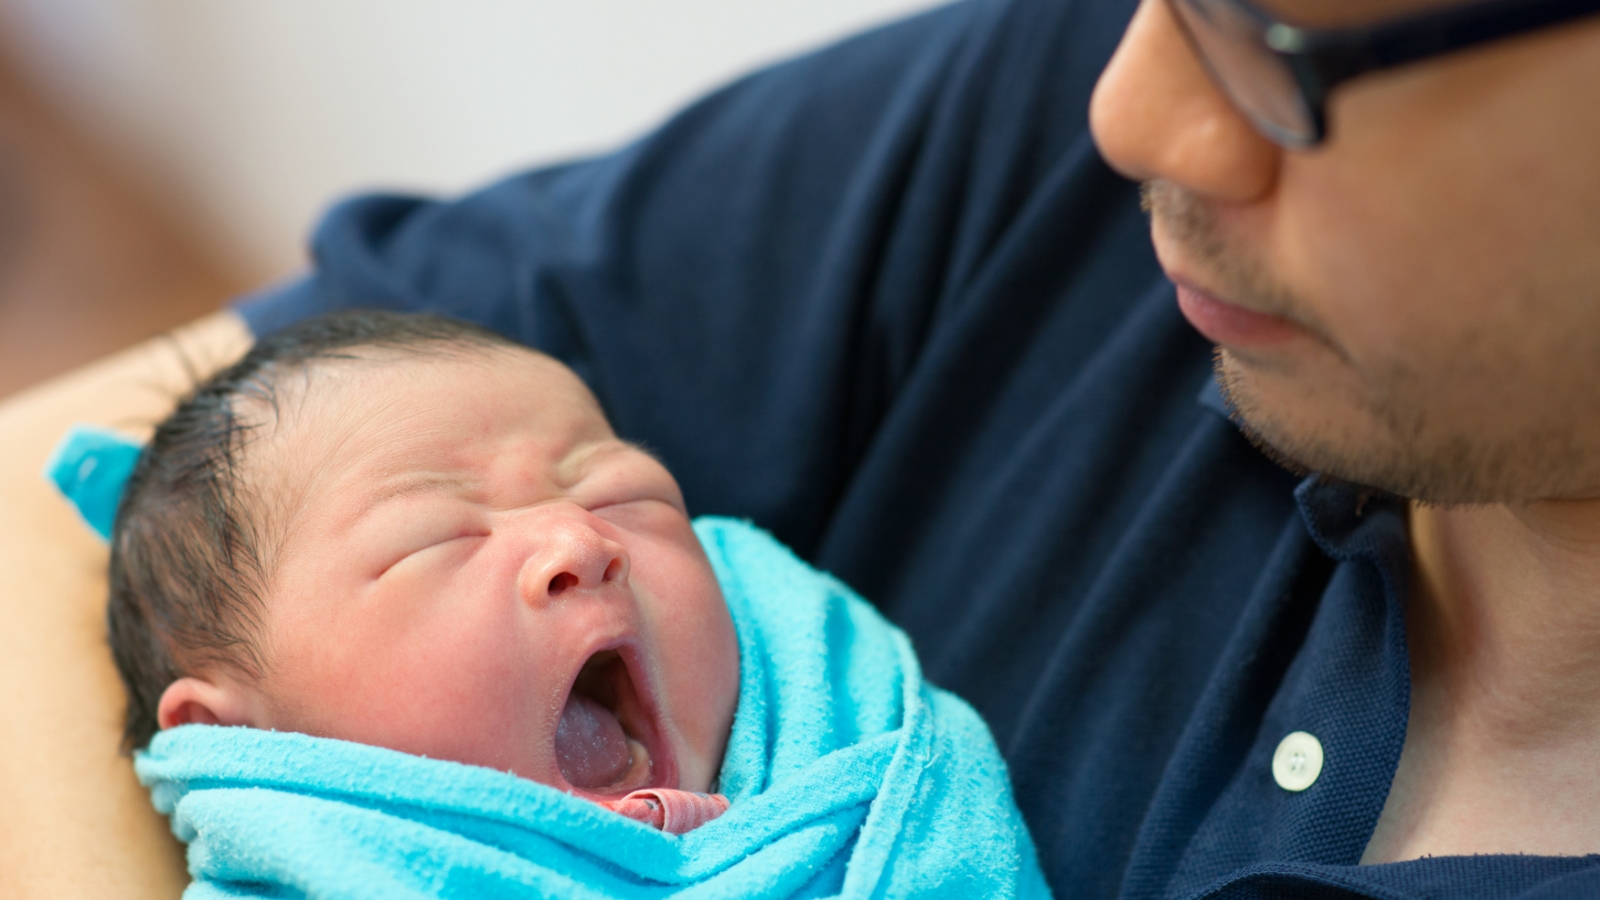 A baby yawns while swaddled in a caregiver's arms.